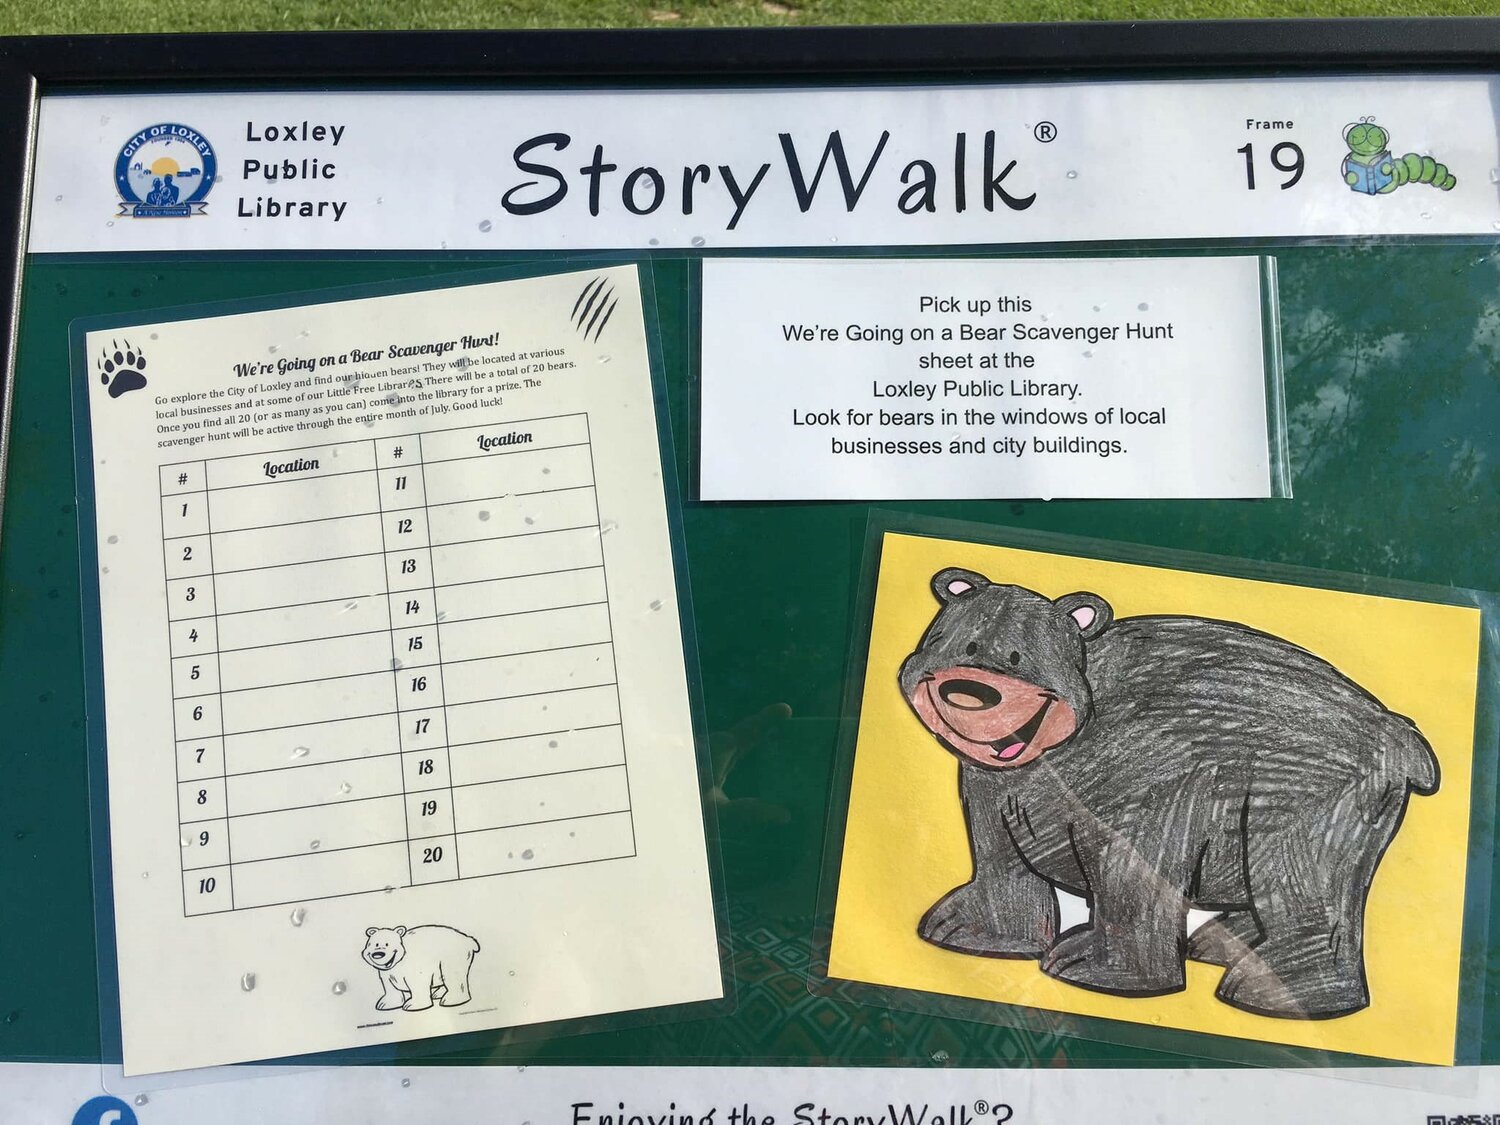 This StoryWalk was made possible through funds received from a Library Services and Technology Act grant and the City of Loxley